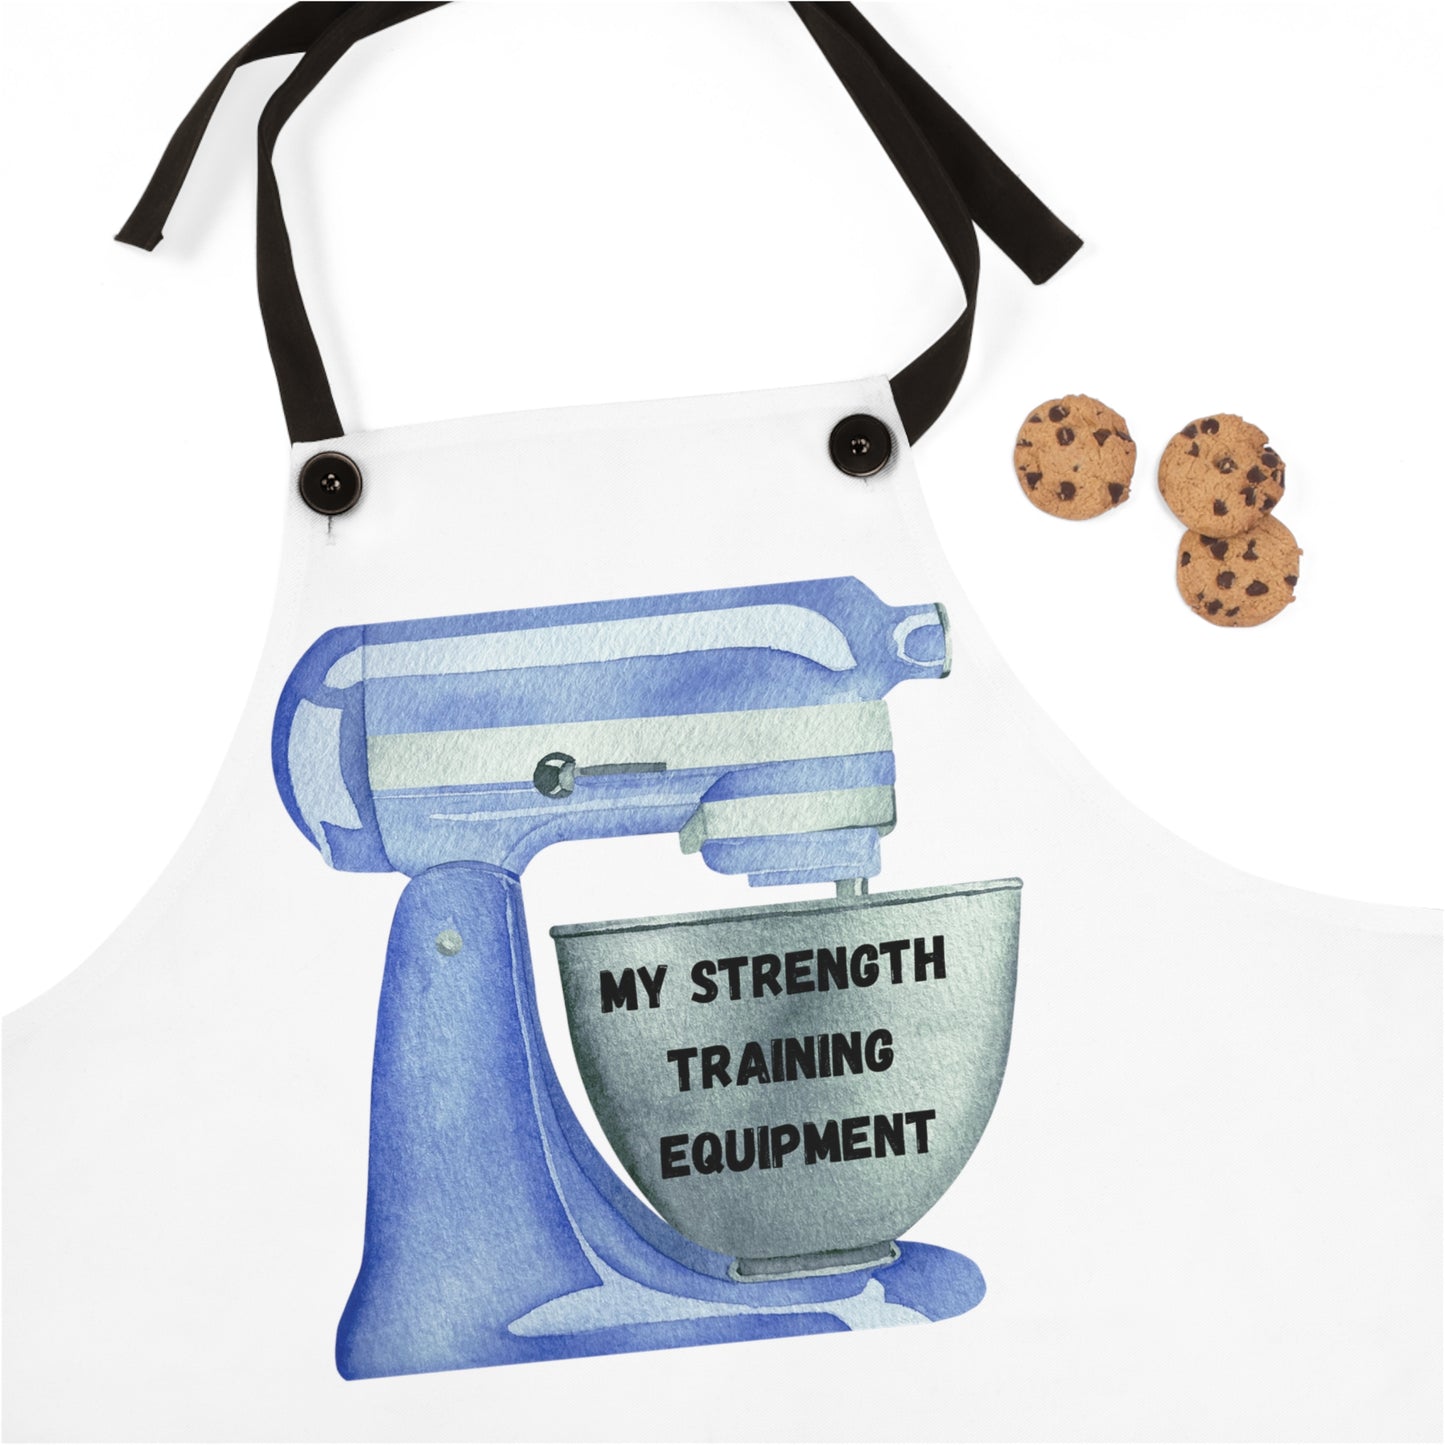 My Strength Training Equipment Apron White with Blue